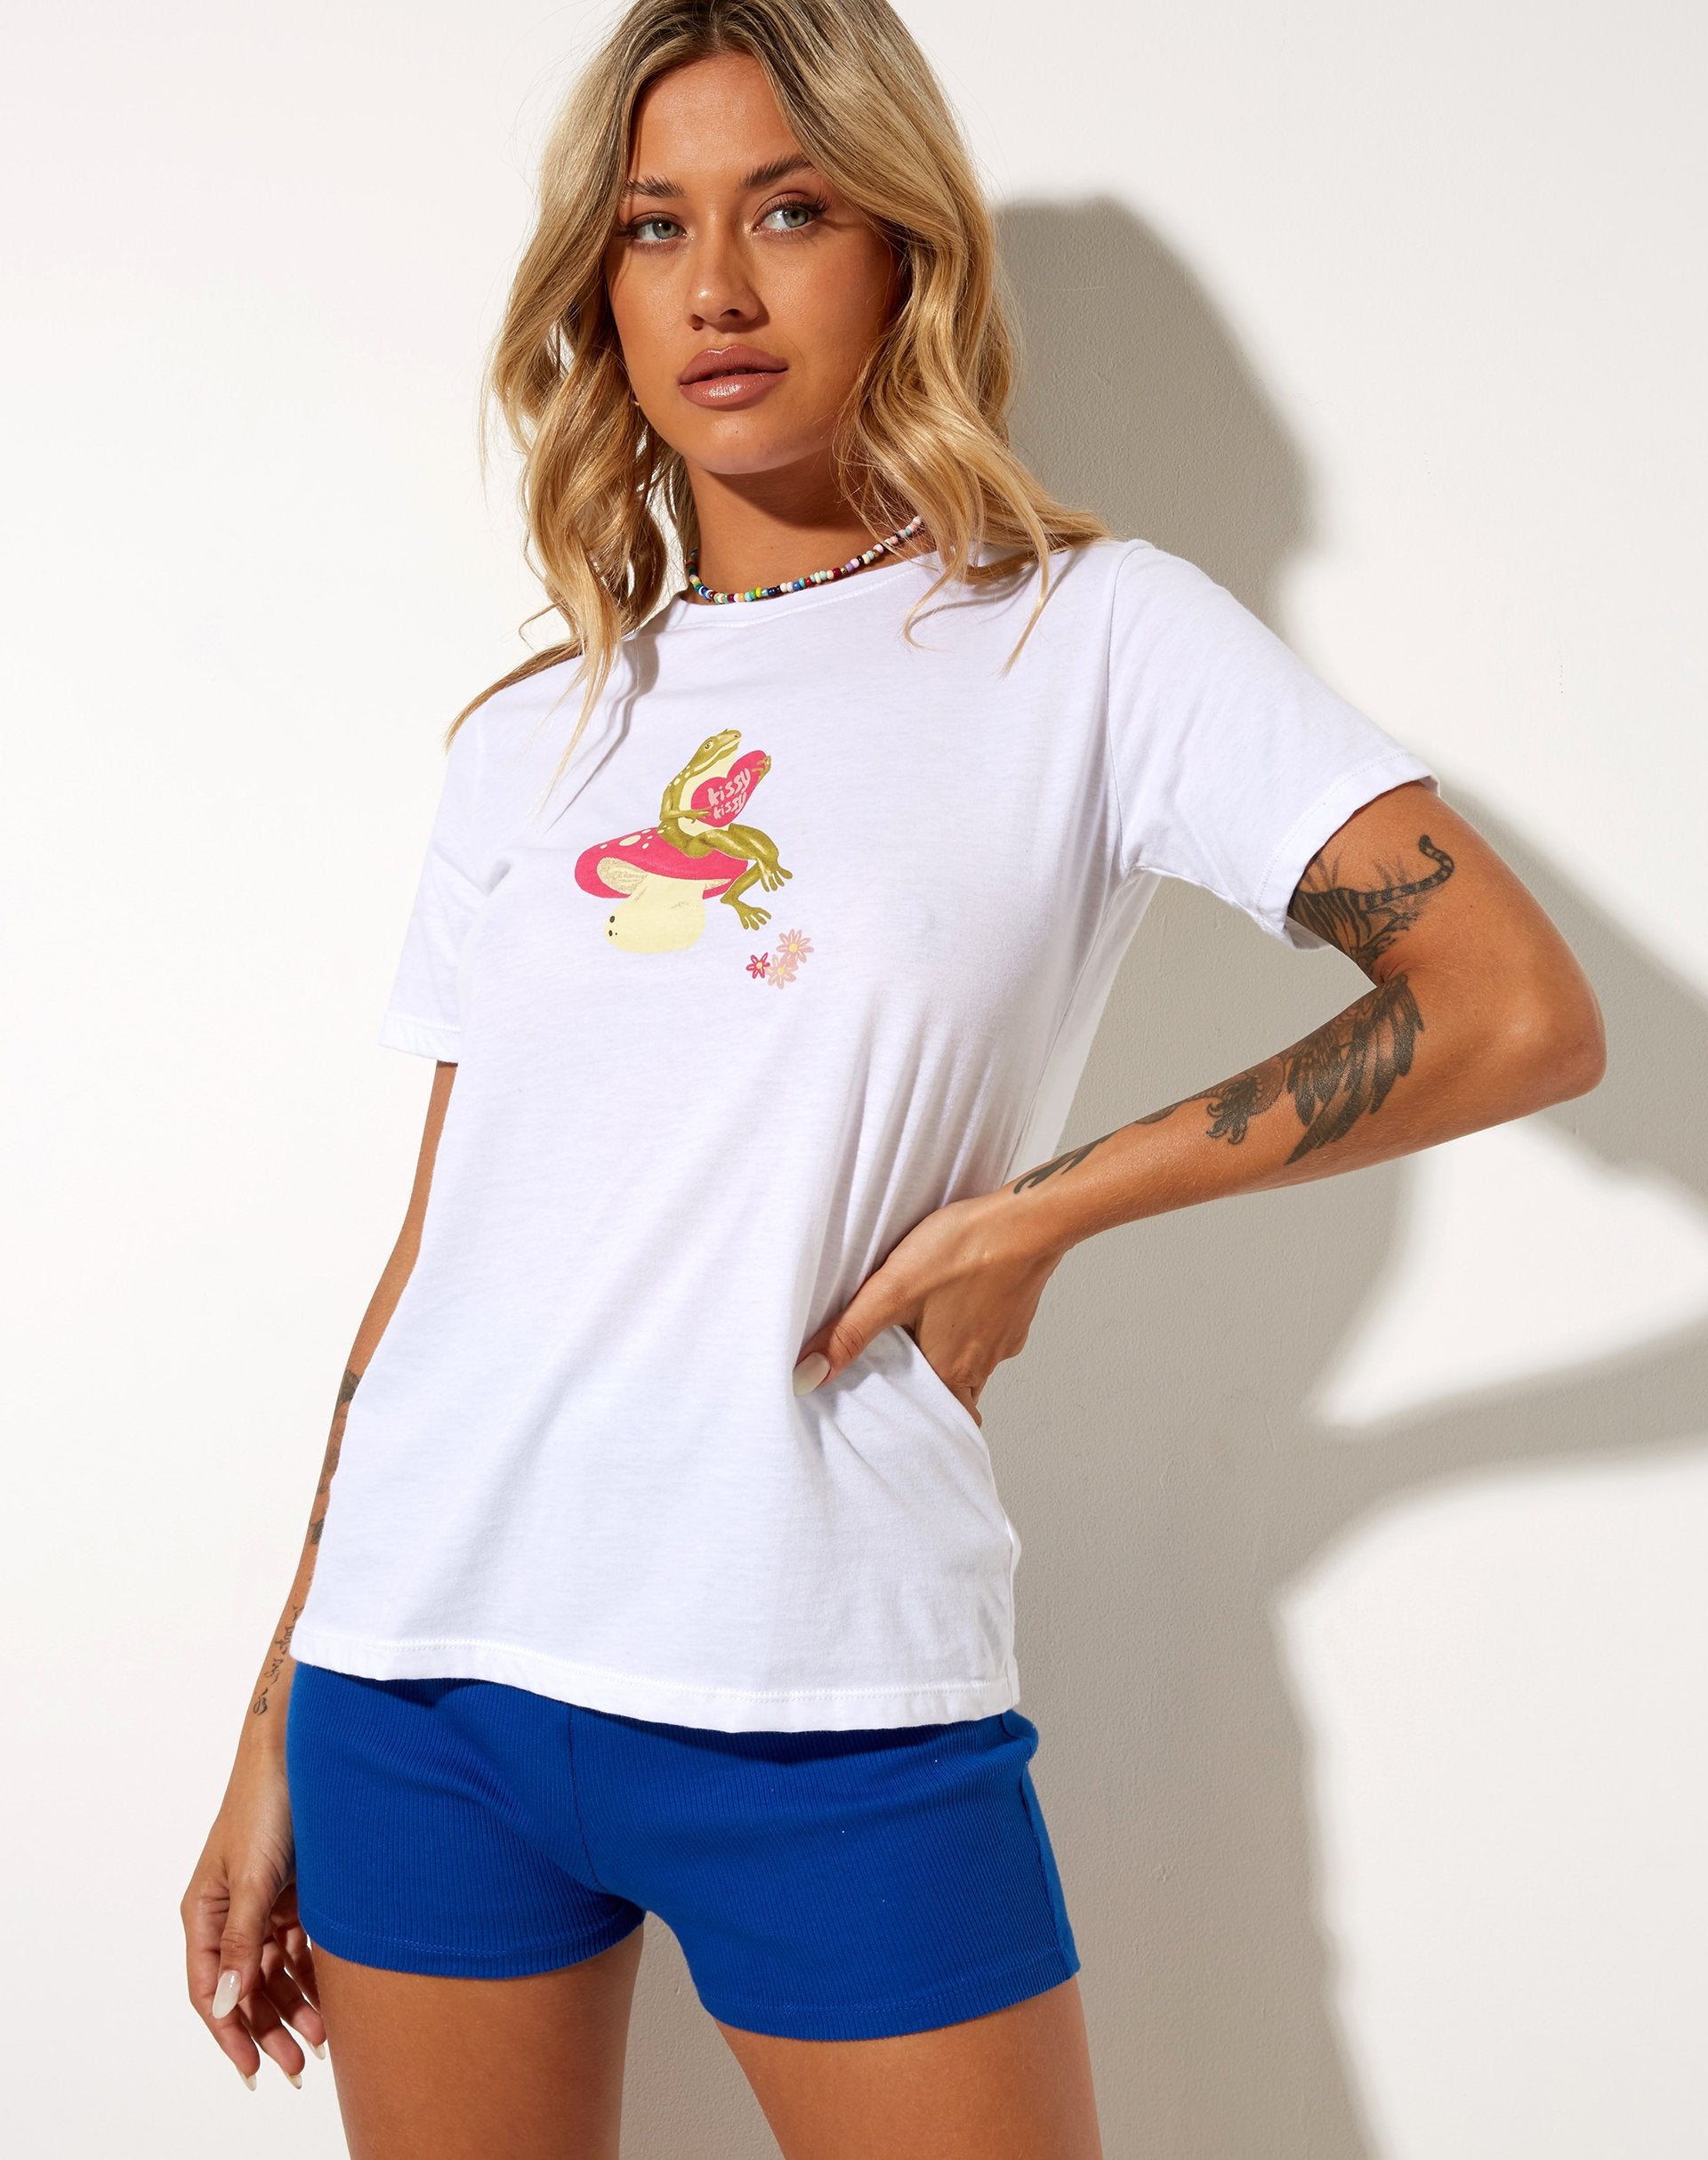 Image of Slim Fit Tee in White Kissing Frog